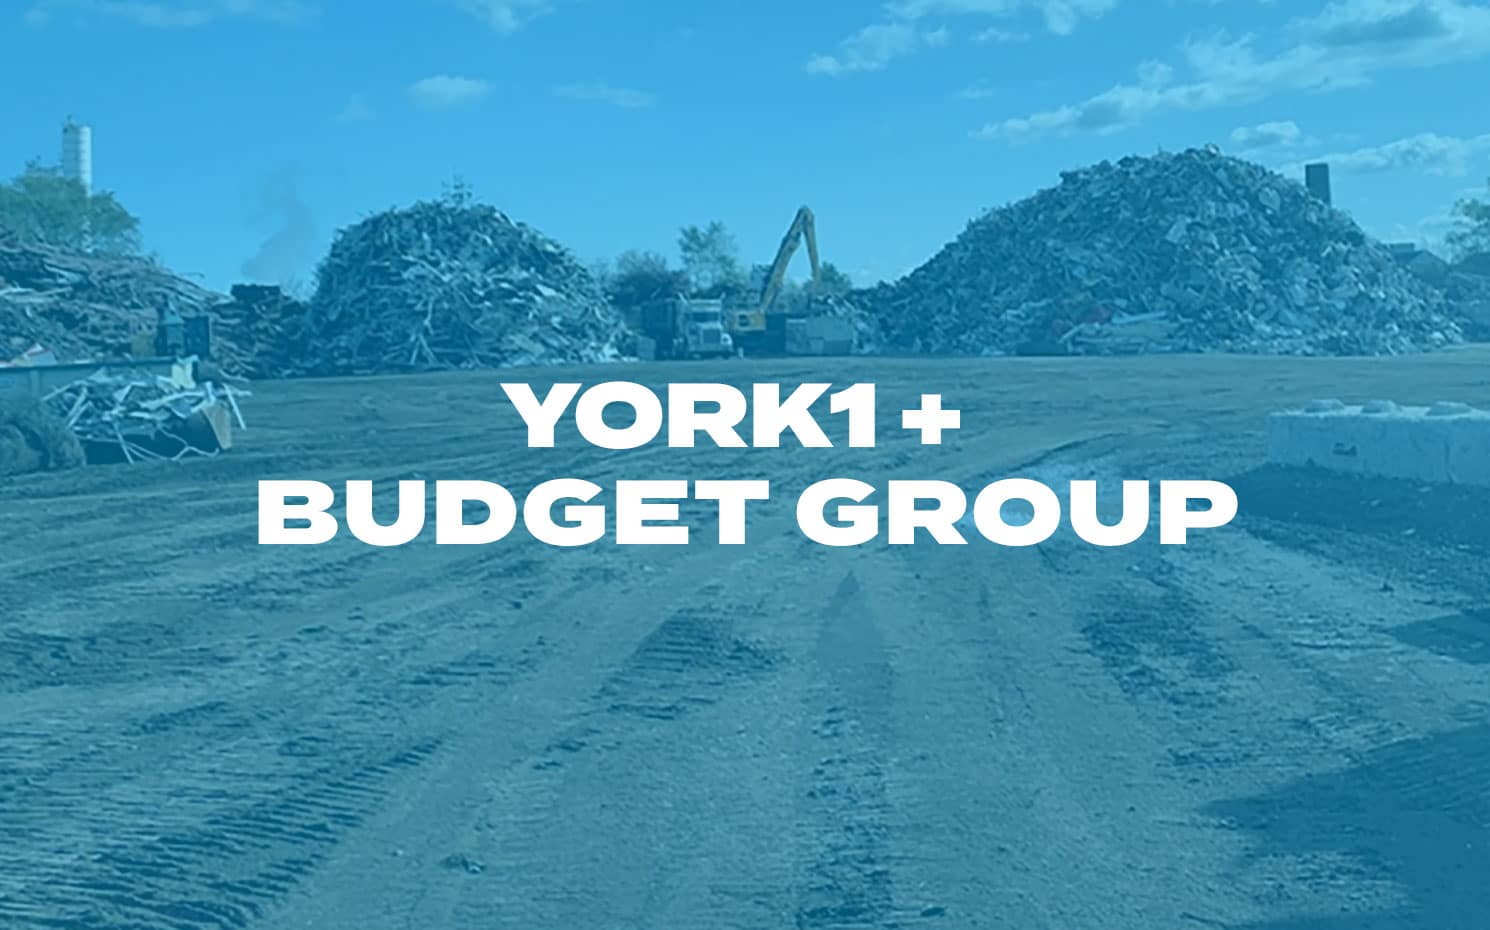 York1 + Budget Group on blue overlay on top of scrap yard